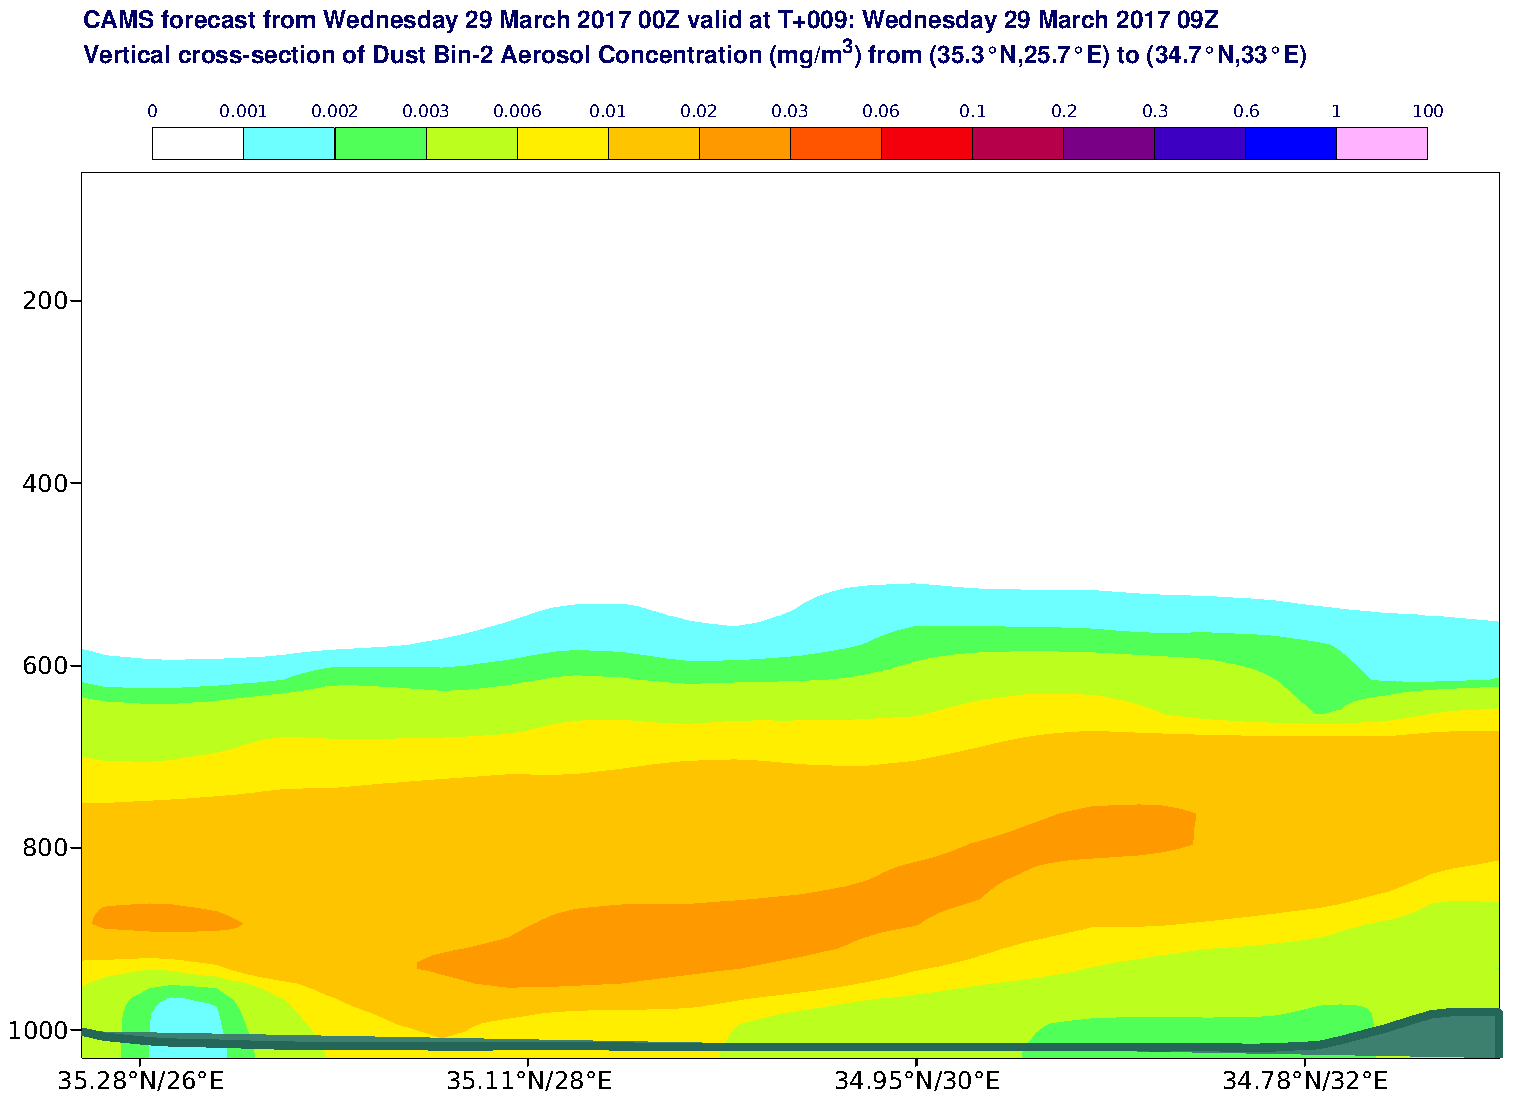 Vertical cross-section of Dust Bin-2 Aerosol Concentration (mg/m3) valid at T9 - 2017-03-29 09:00